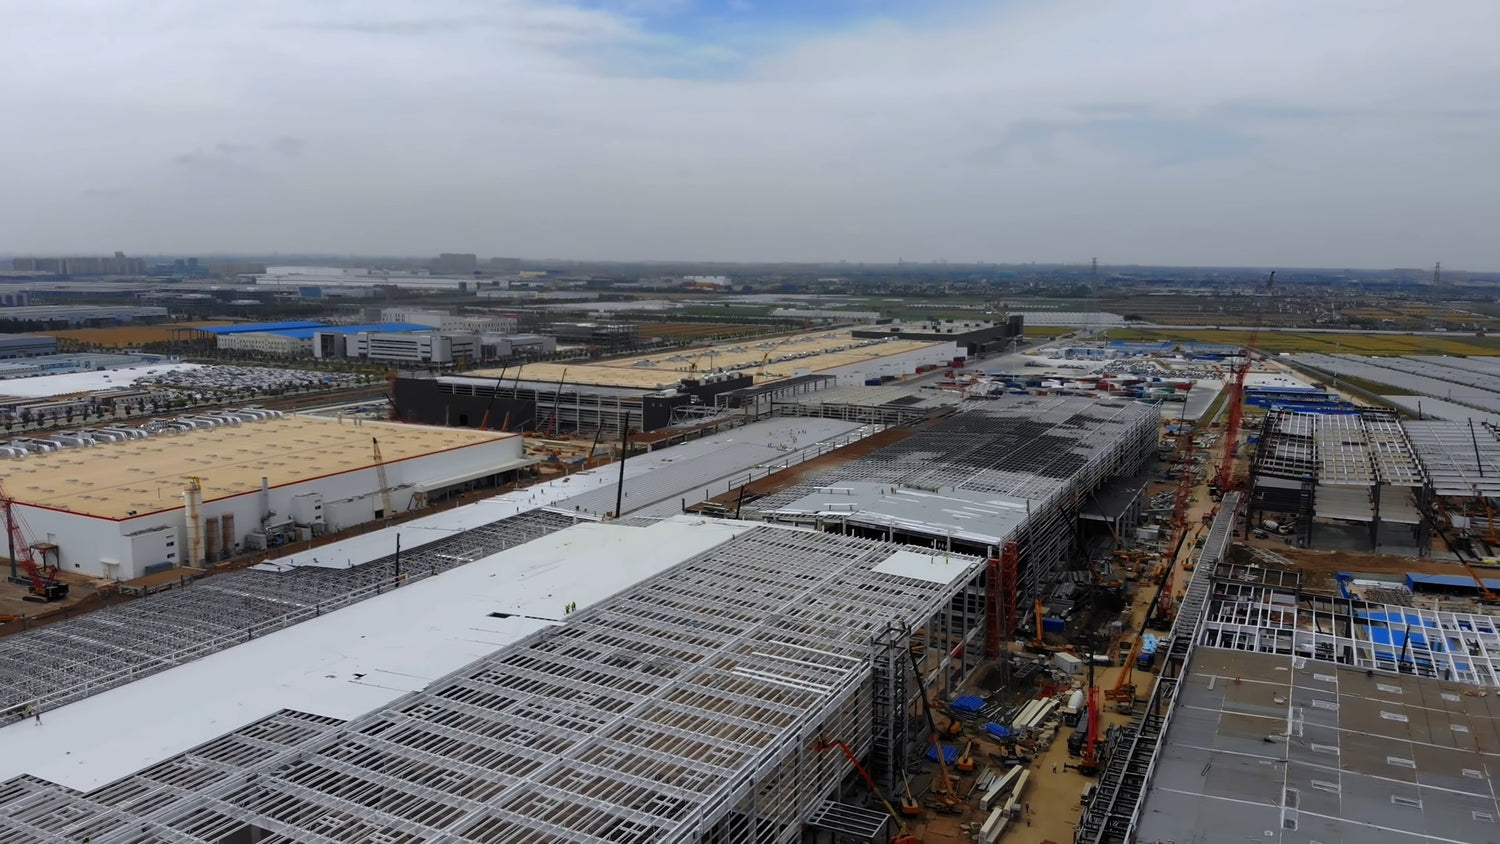 Tesla Giga Shanghai About To Finish Phase 2 Construction, Chinese-Made Model Y Production Could Happen Soon